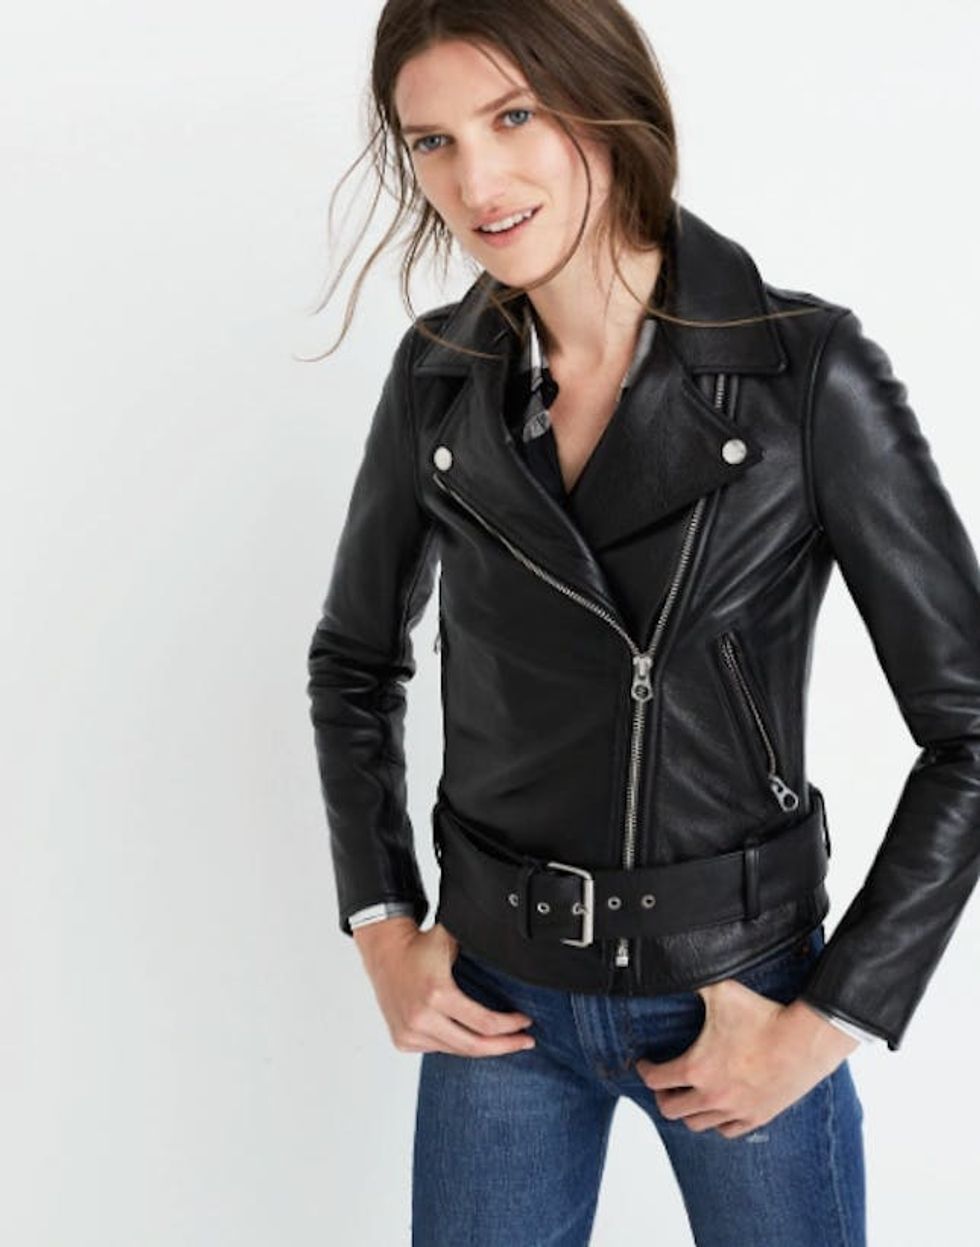 Badass Black Leather Jackets for Every Budget - Brit + Co